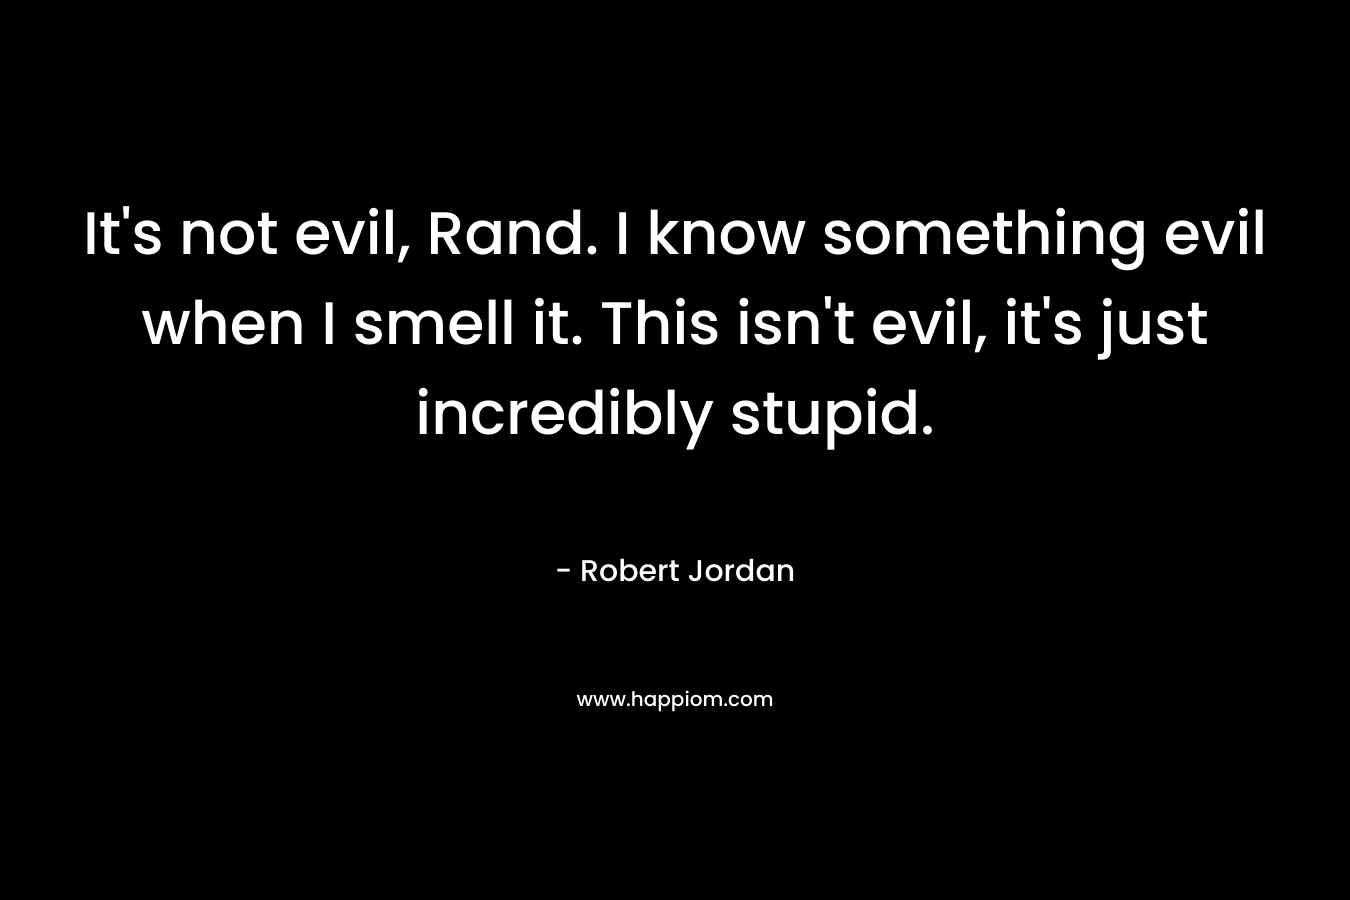 It’s not evil, Rand. I know something evil when I smell it. This isn’t evil, it’s just incredibly stupid. – Robert Jordan